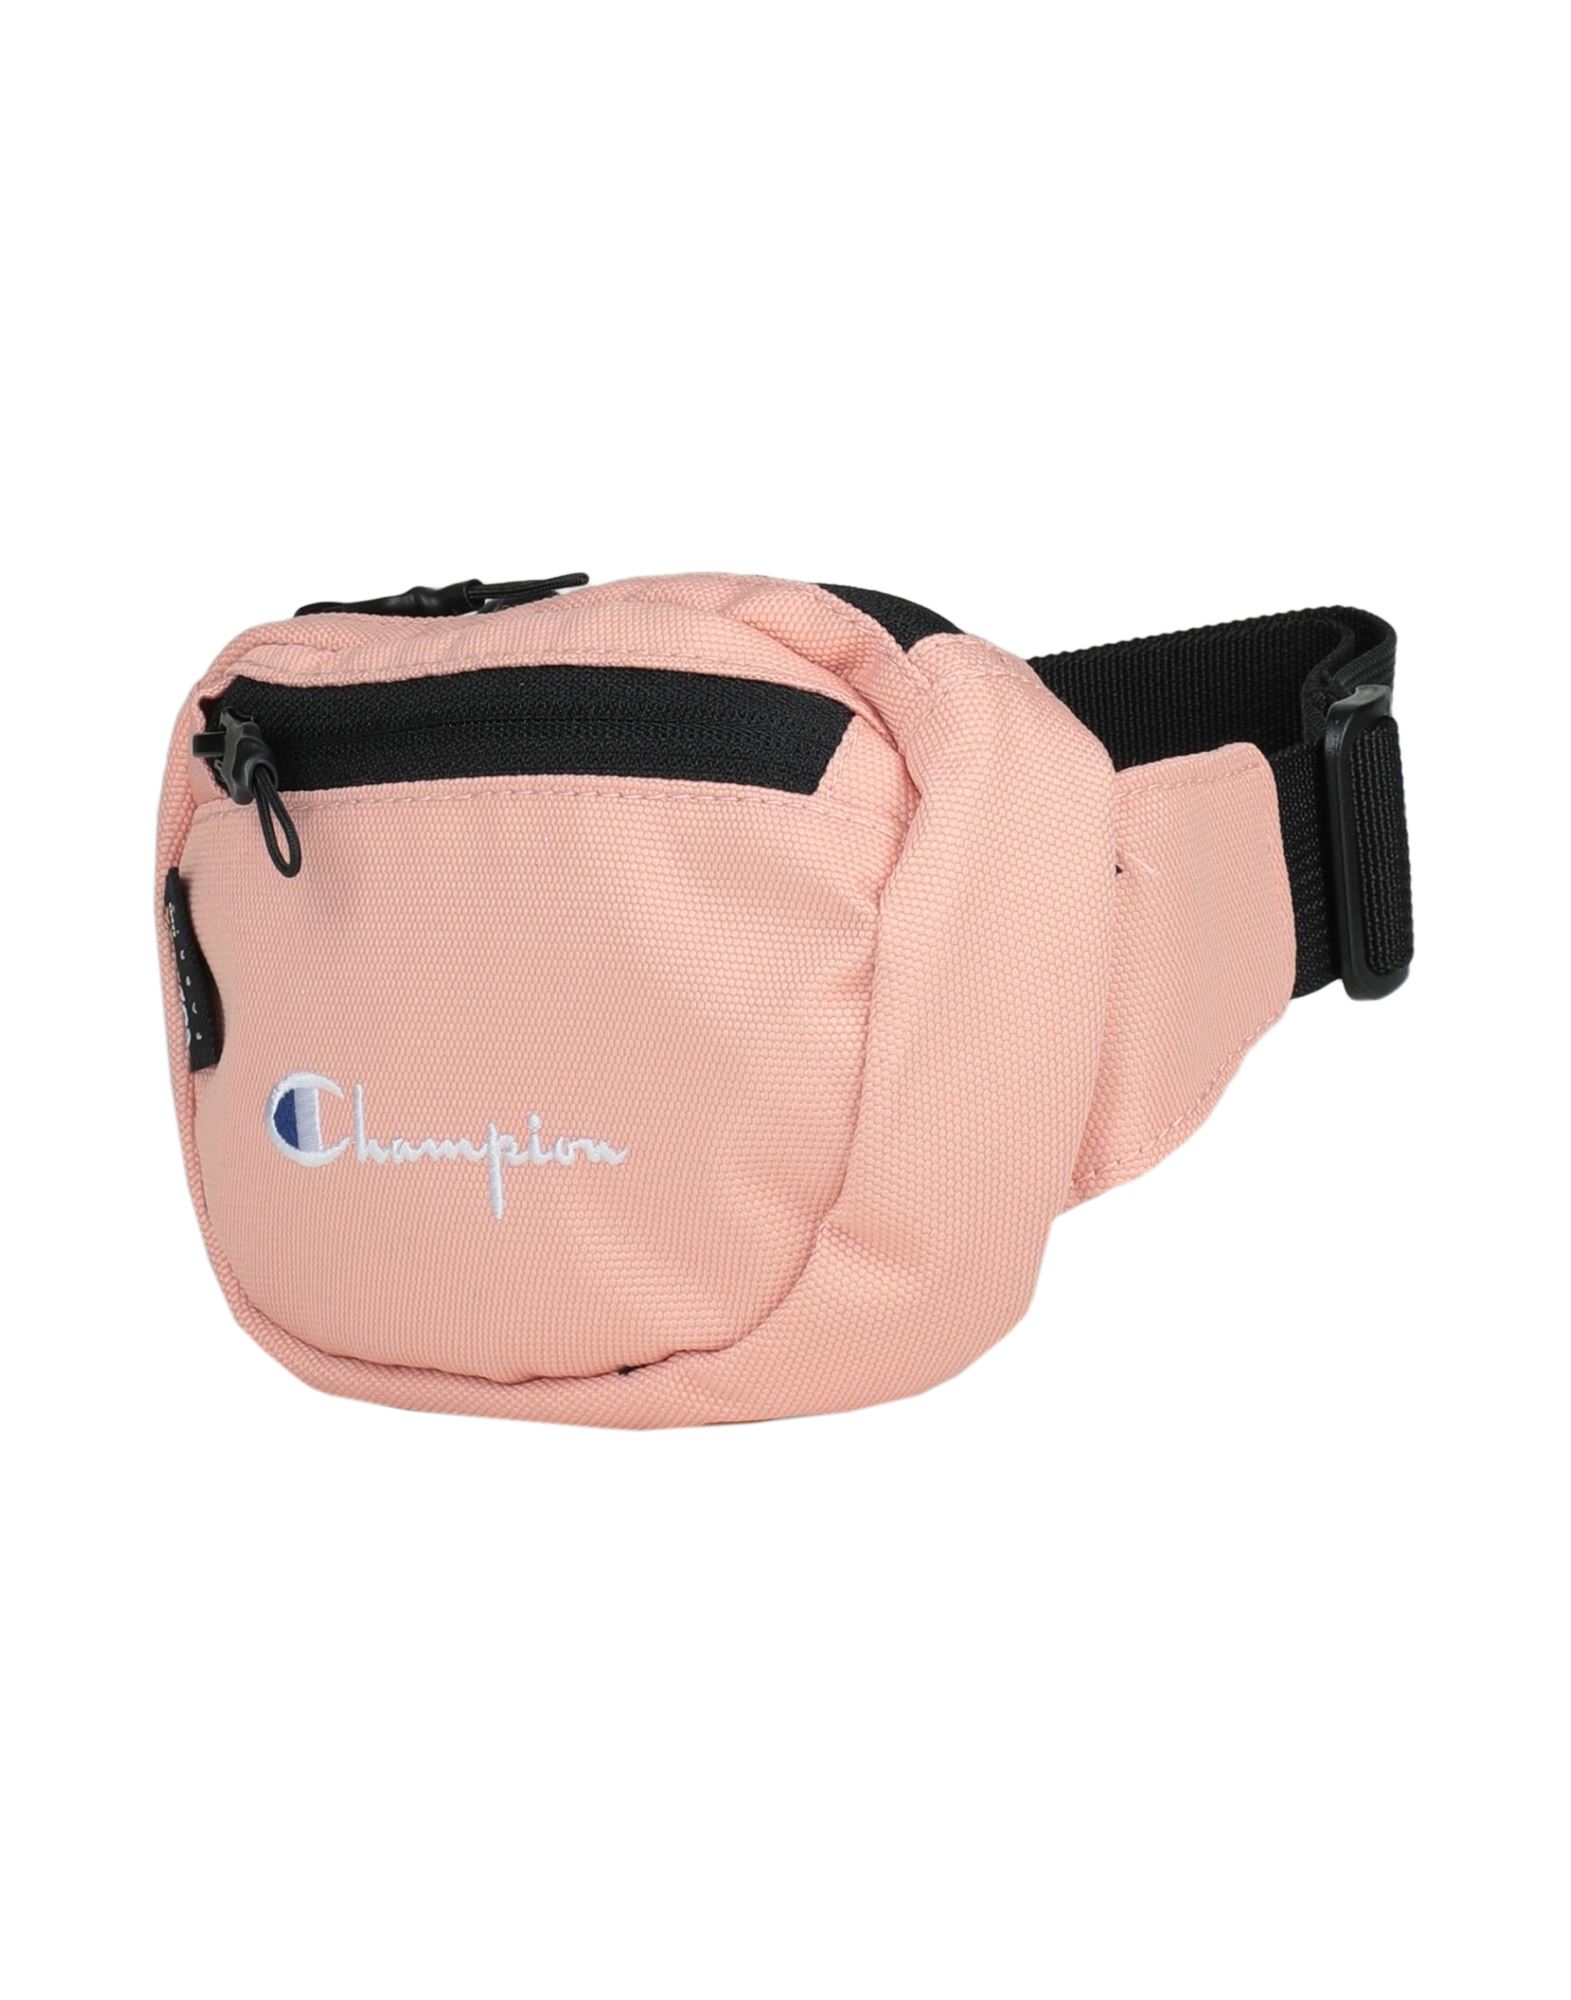 Champion Bum Bags In Pink